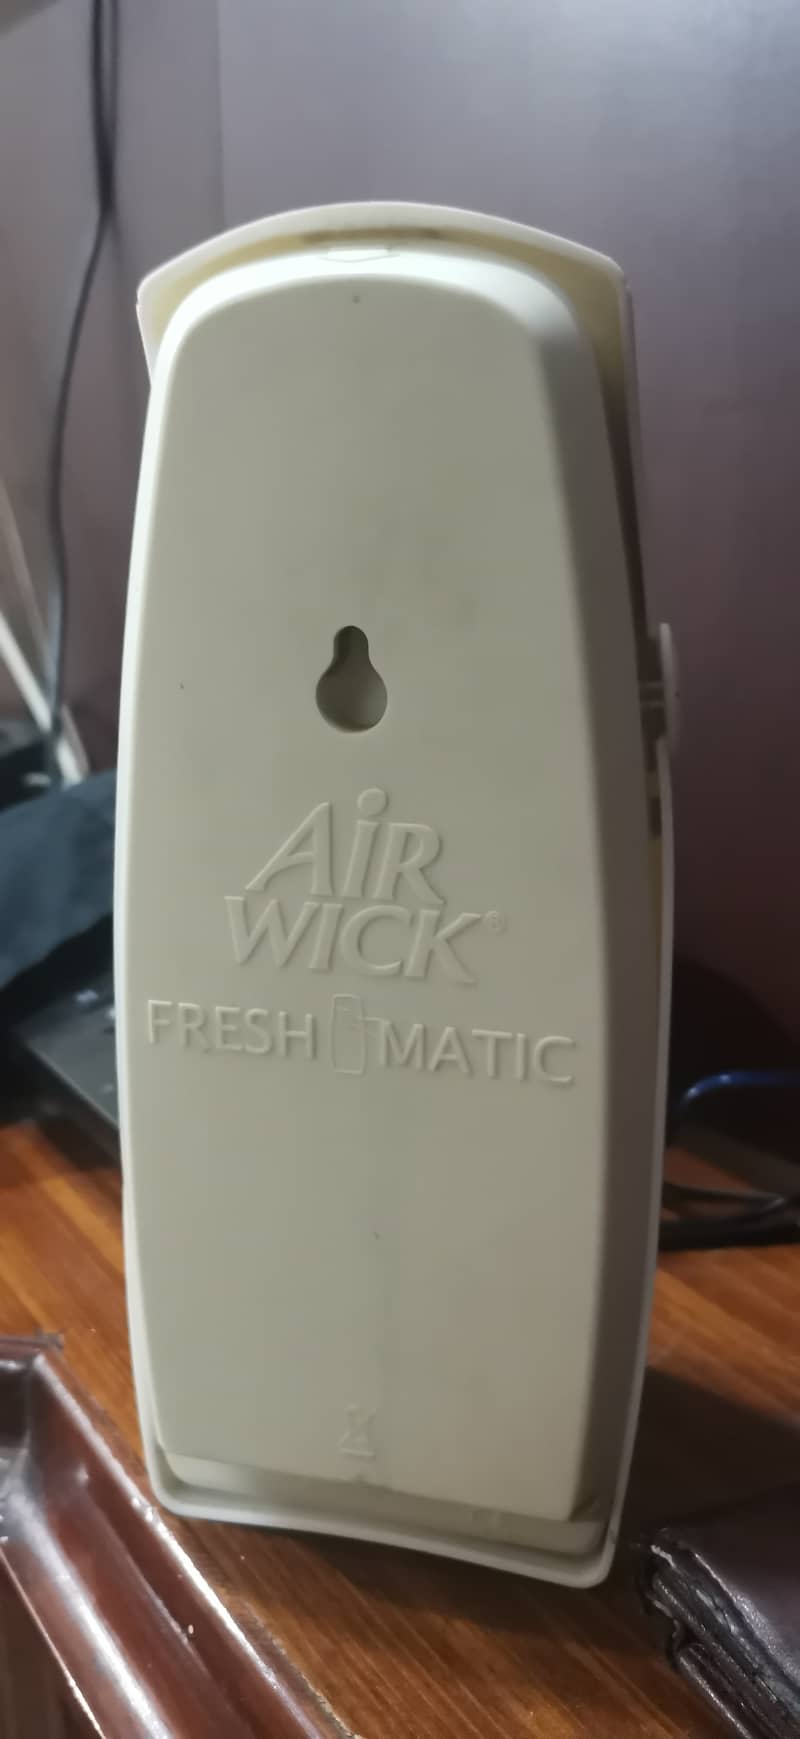 Air Wick Freshmatic Automatic Spray Home Fragrance bought from Dubai 1